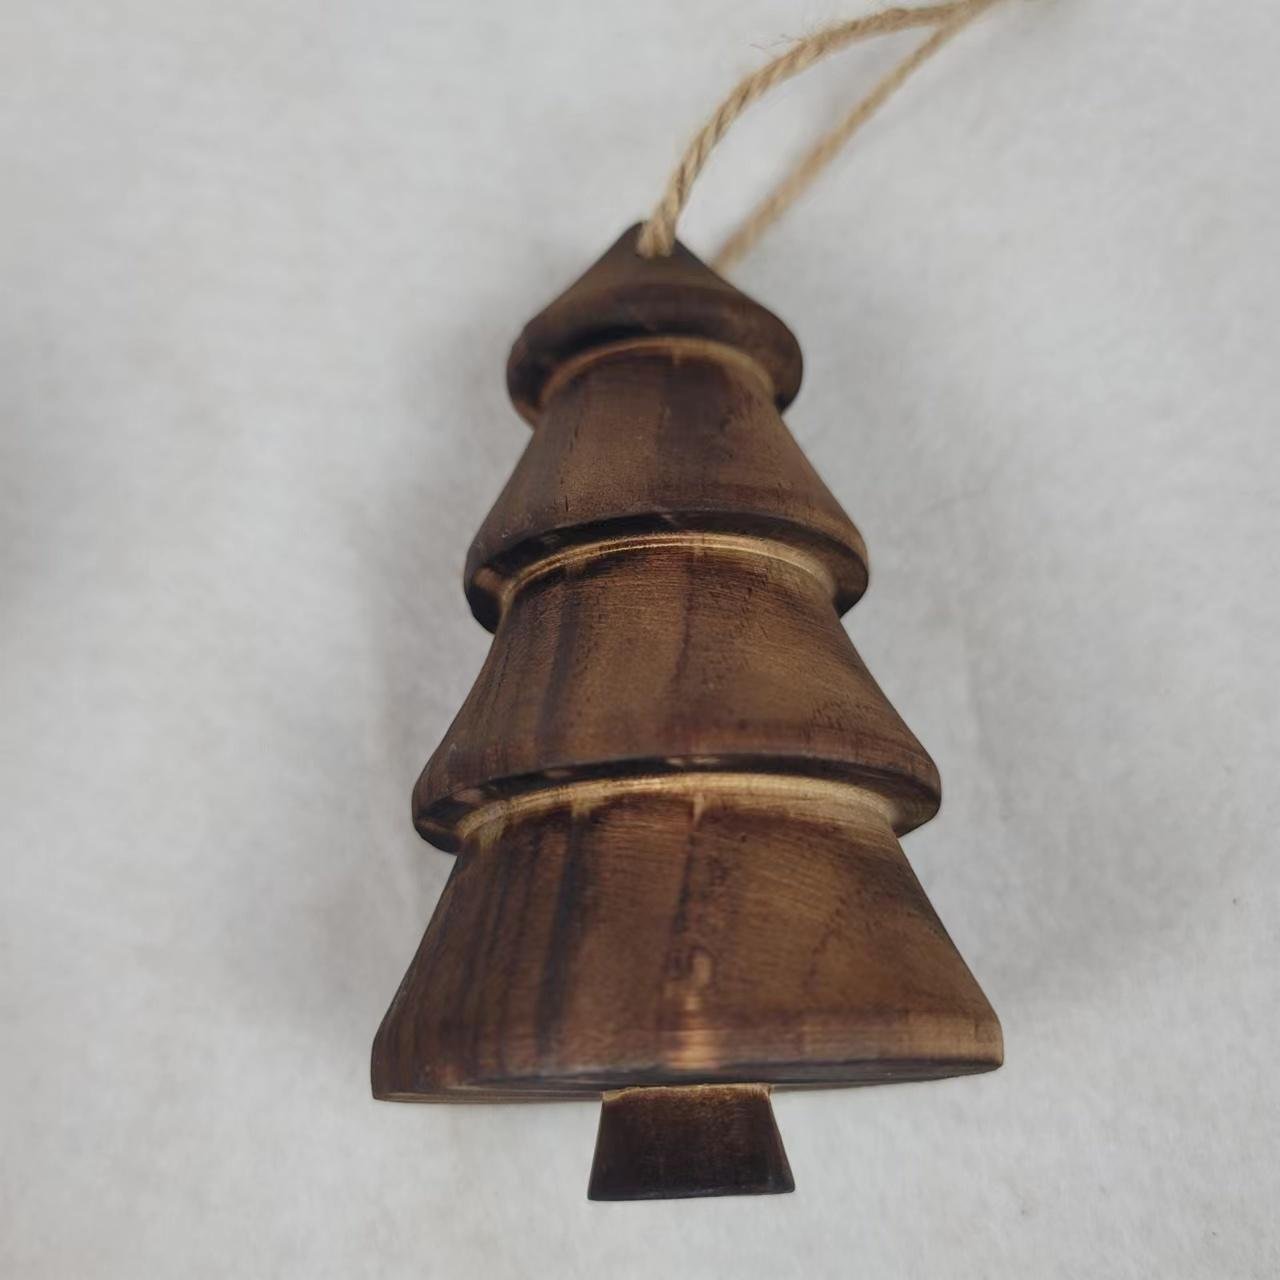 Solid wood Christmas tree ornaments, household ornaments, Christmas tree pendant 2